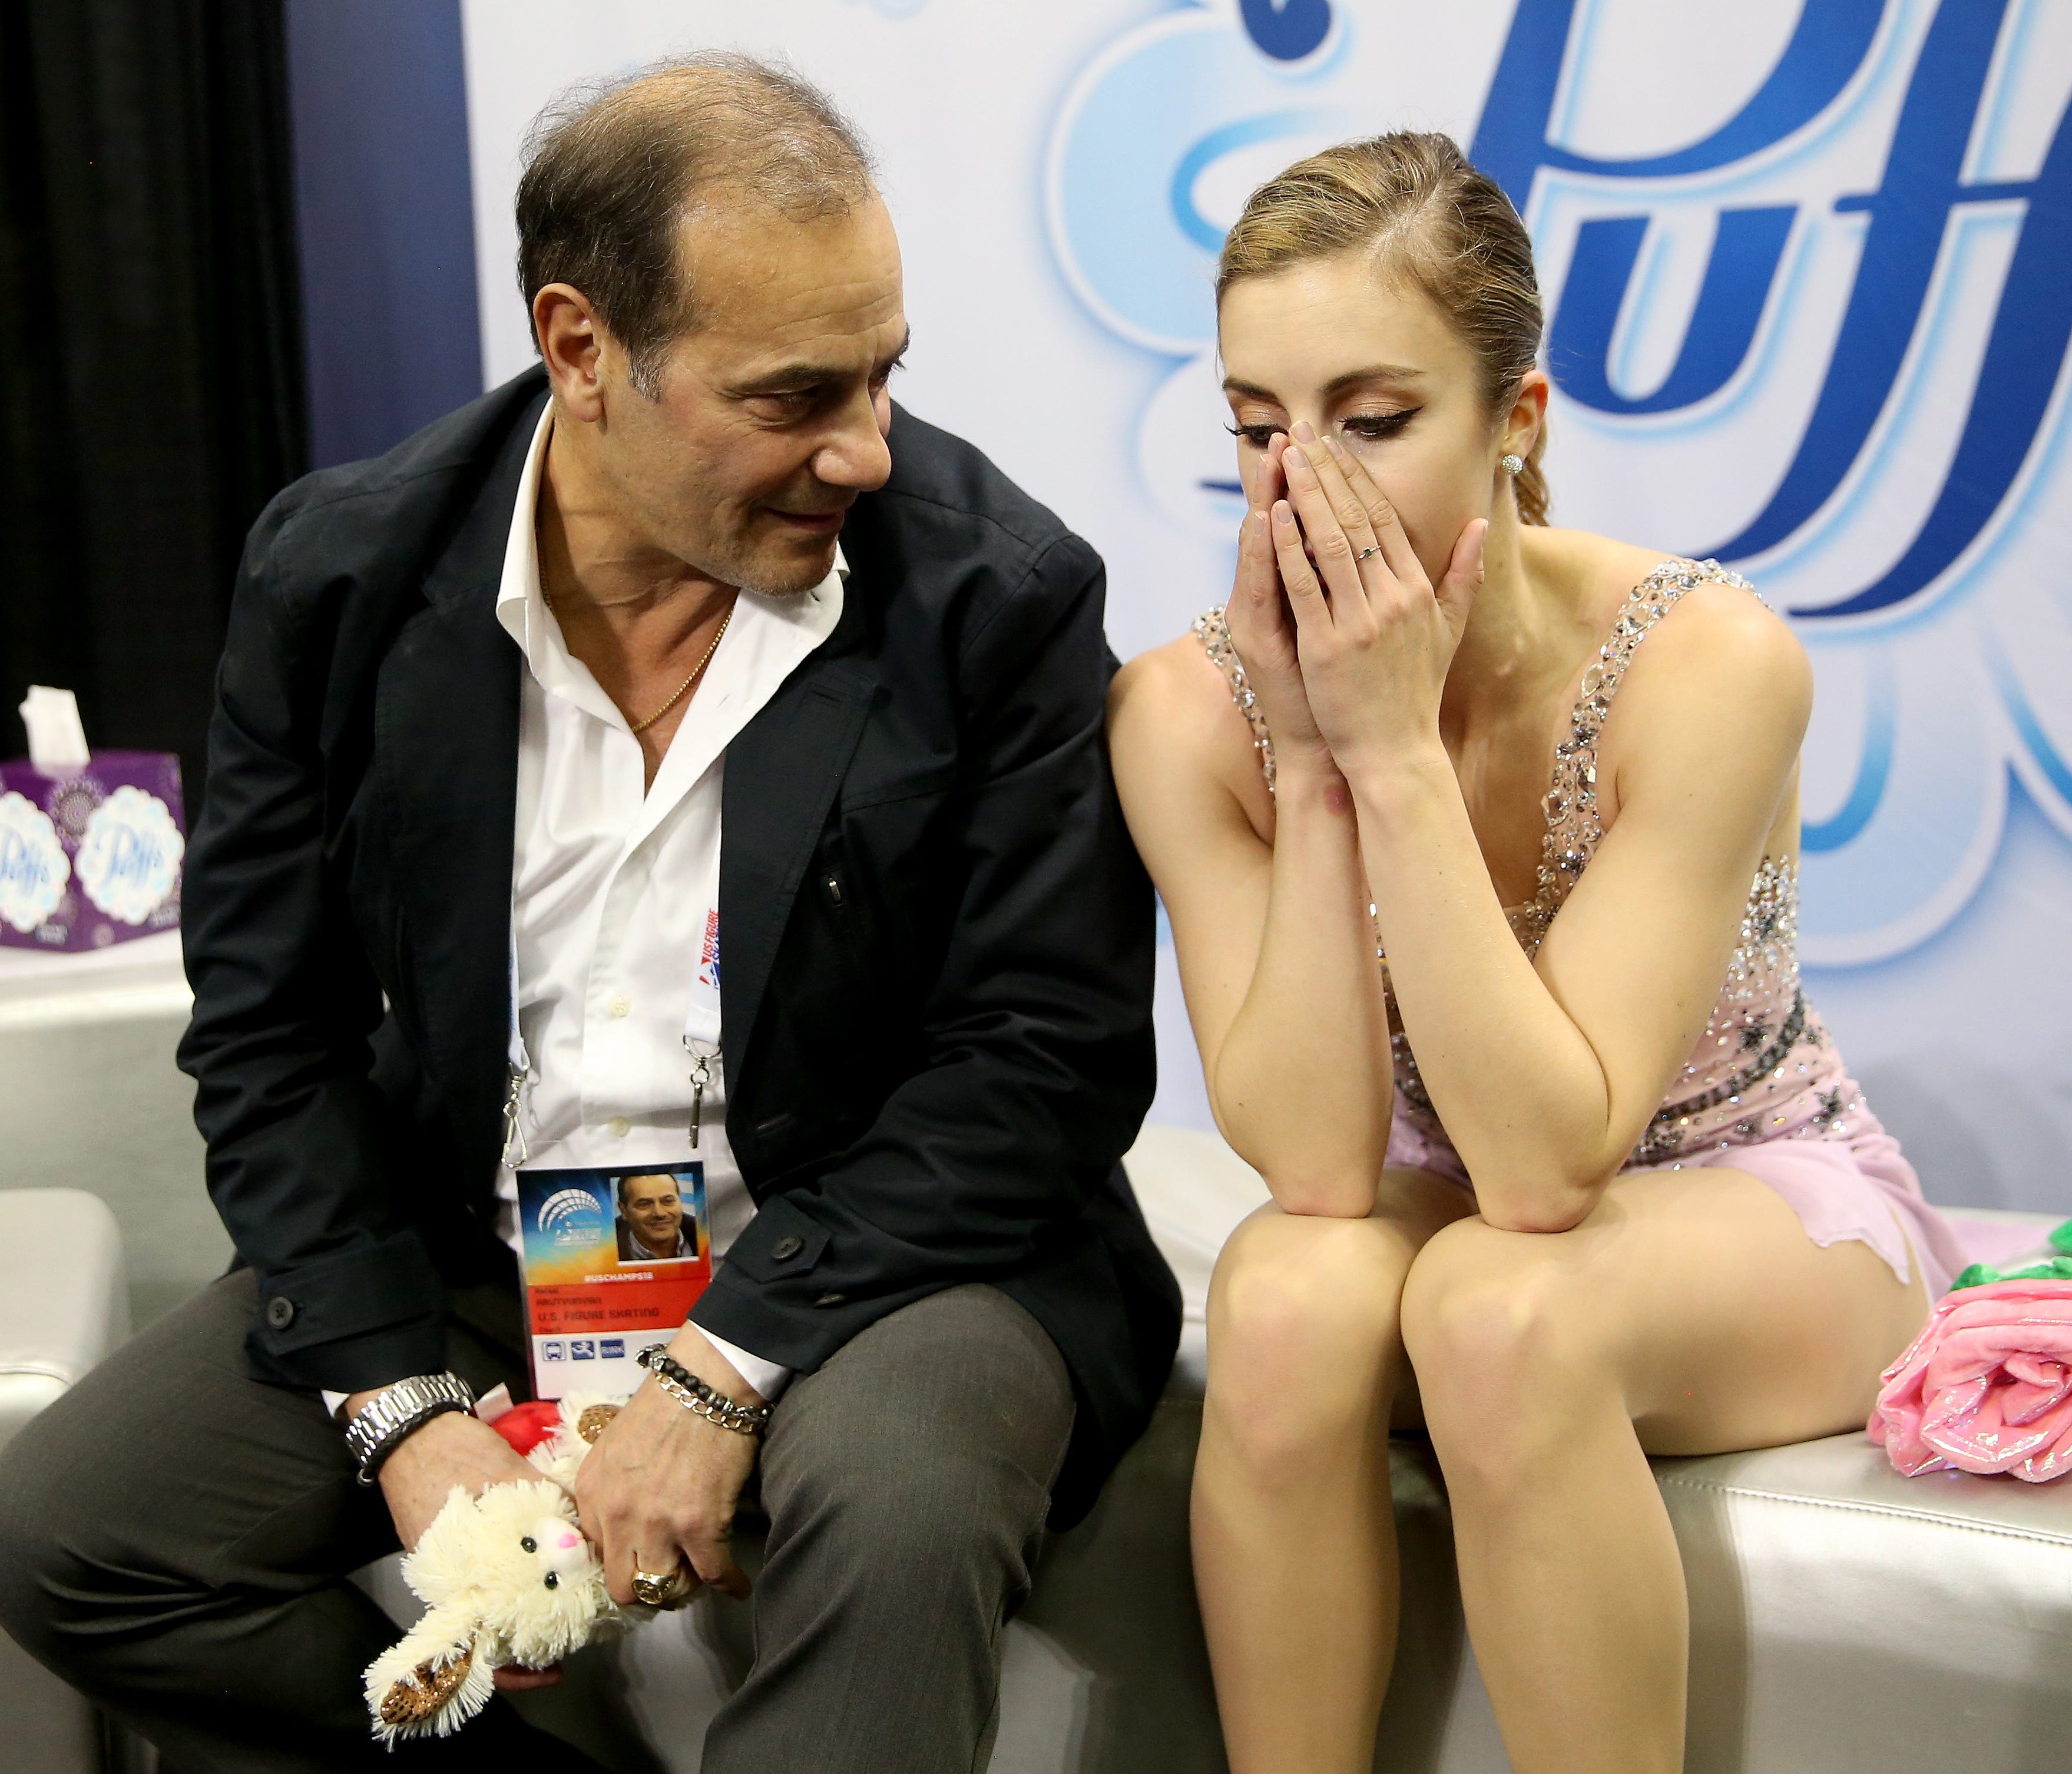 SAN JOSE, CA - JANUARY 05:  Ashley Wagner waits for her score in the kiss and cry with coach Rafael Arutunian after skating inthe Ladies Free Skate during the 2018 Prudential U.S. Figure Skating Championships at the SAP Center on January 5, 2018 in S